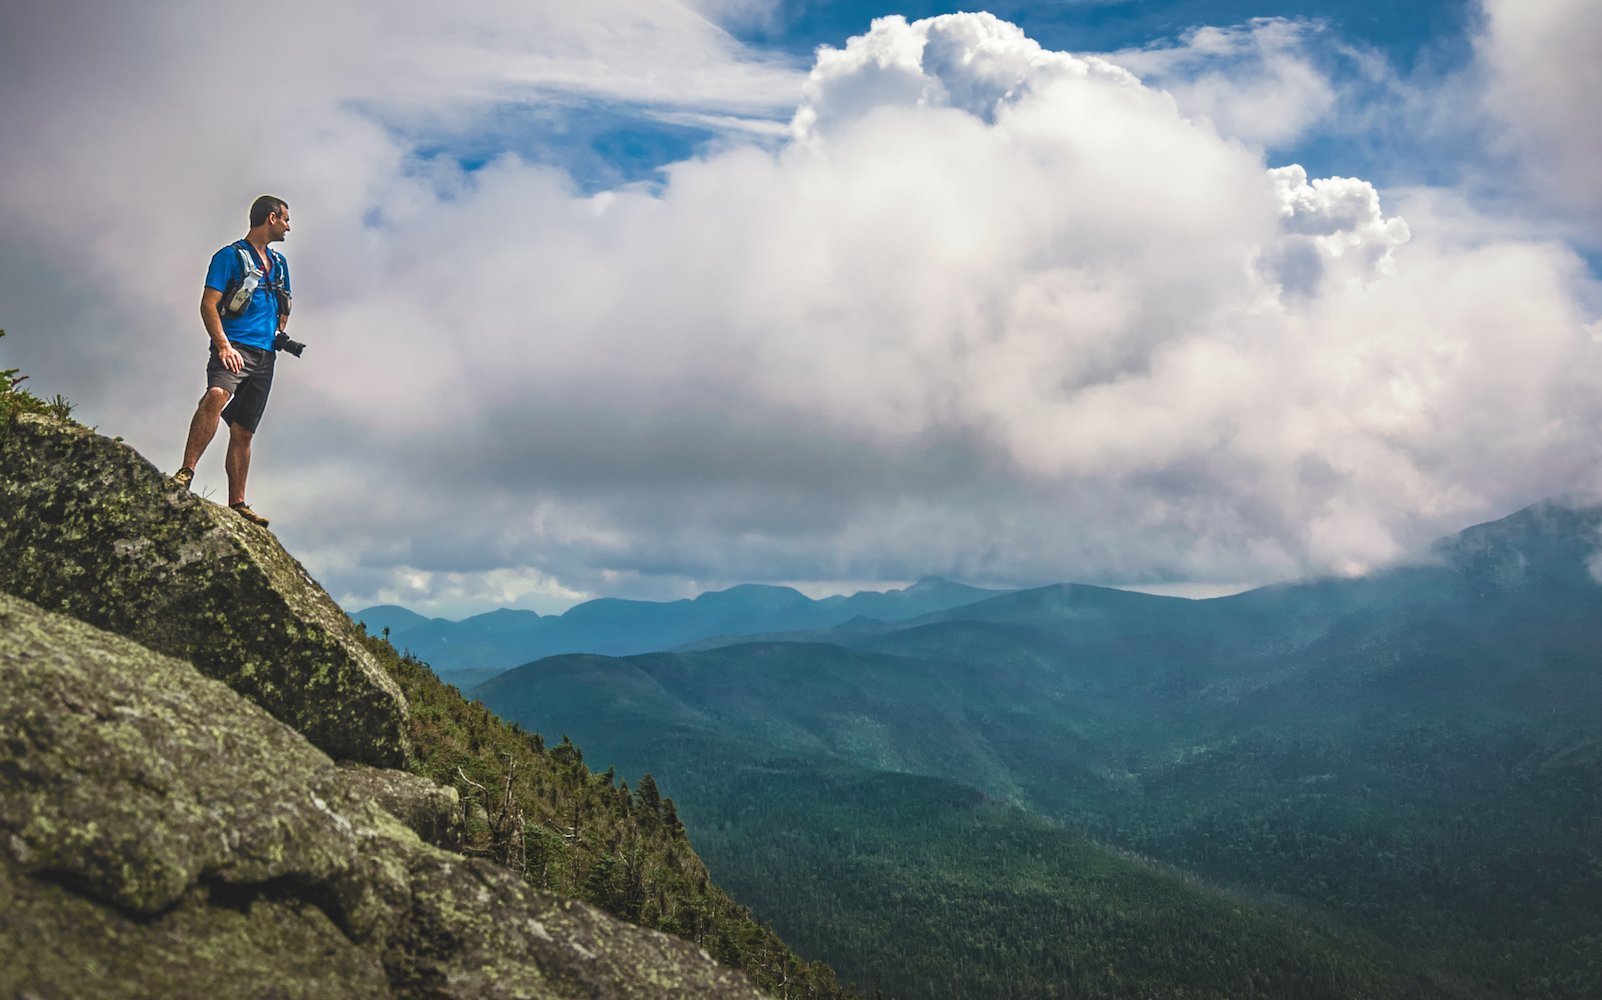 A Photographer’s Perspective of The Mount Colden Loop - Pure Adirondacks